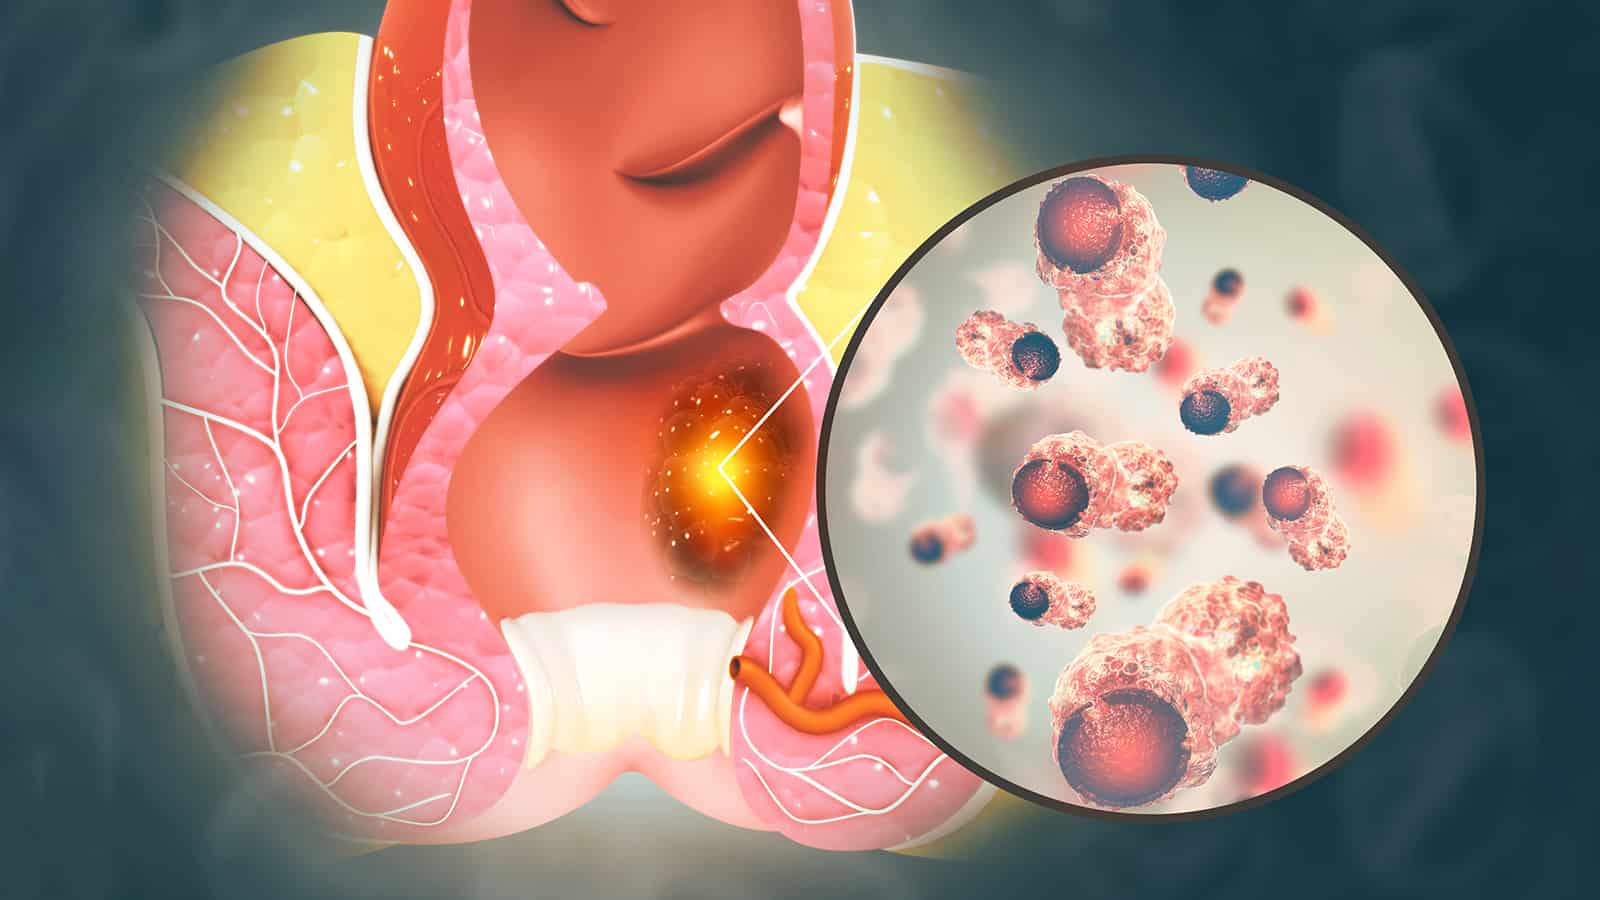 8 Signs of Anal Cancer Never to Ignore